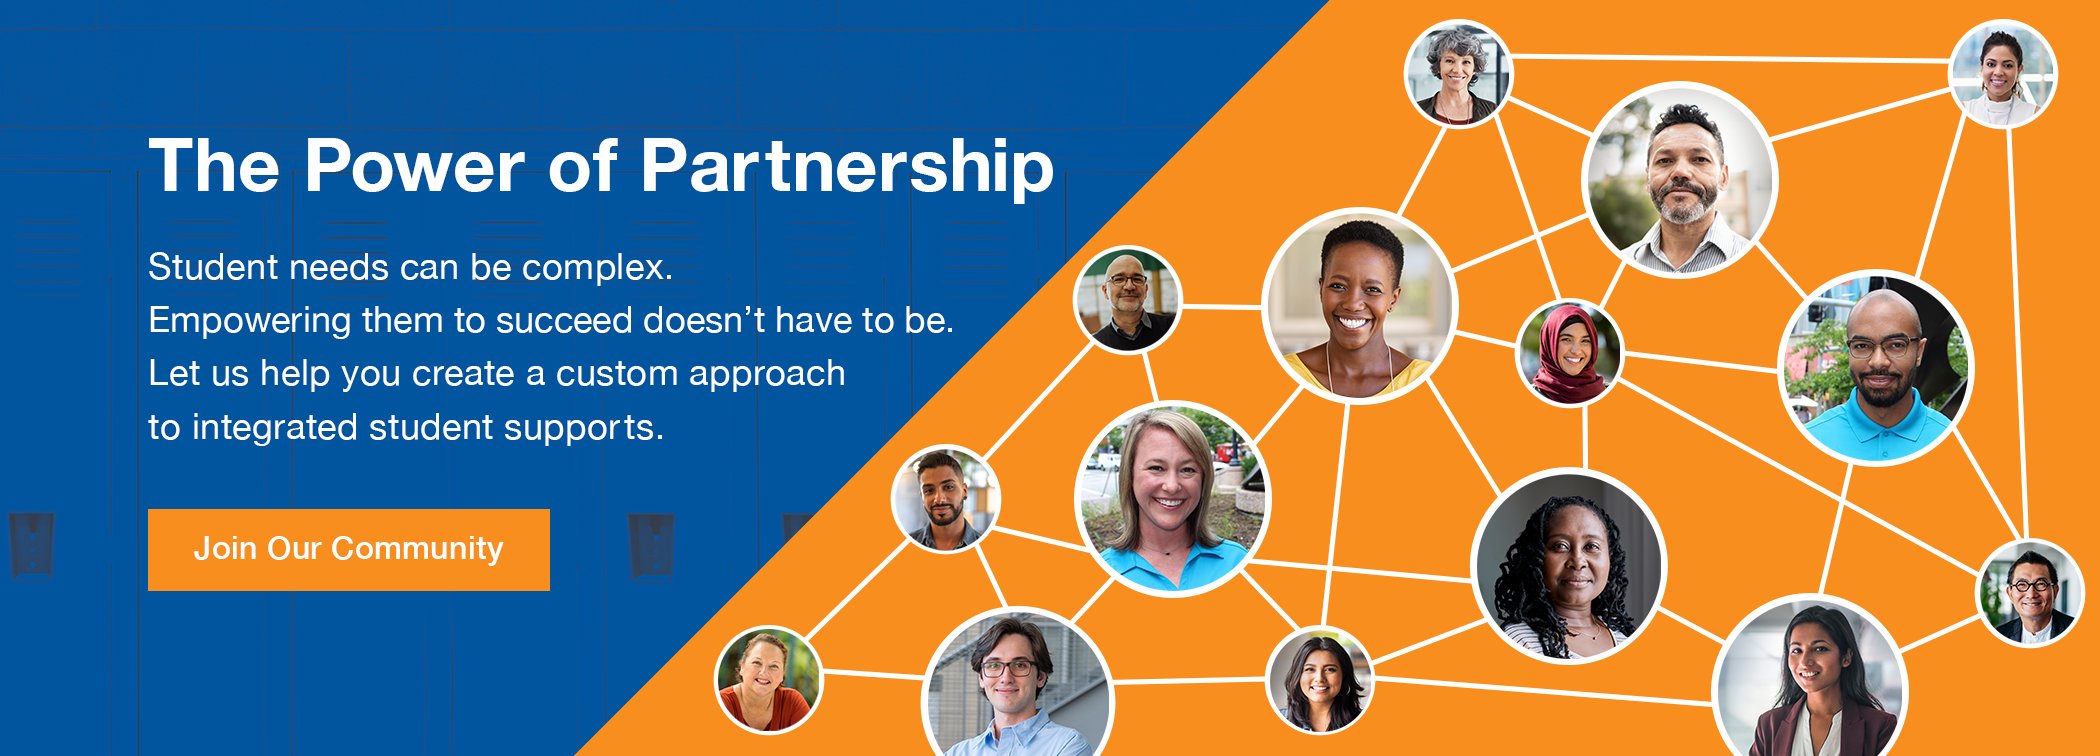 The Power of Partnership: Join Our Community